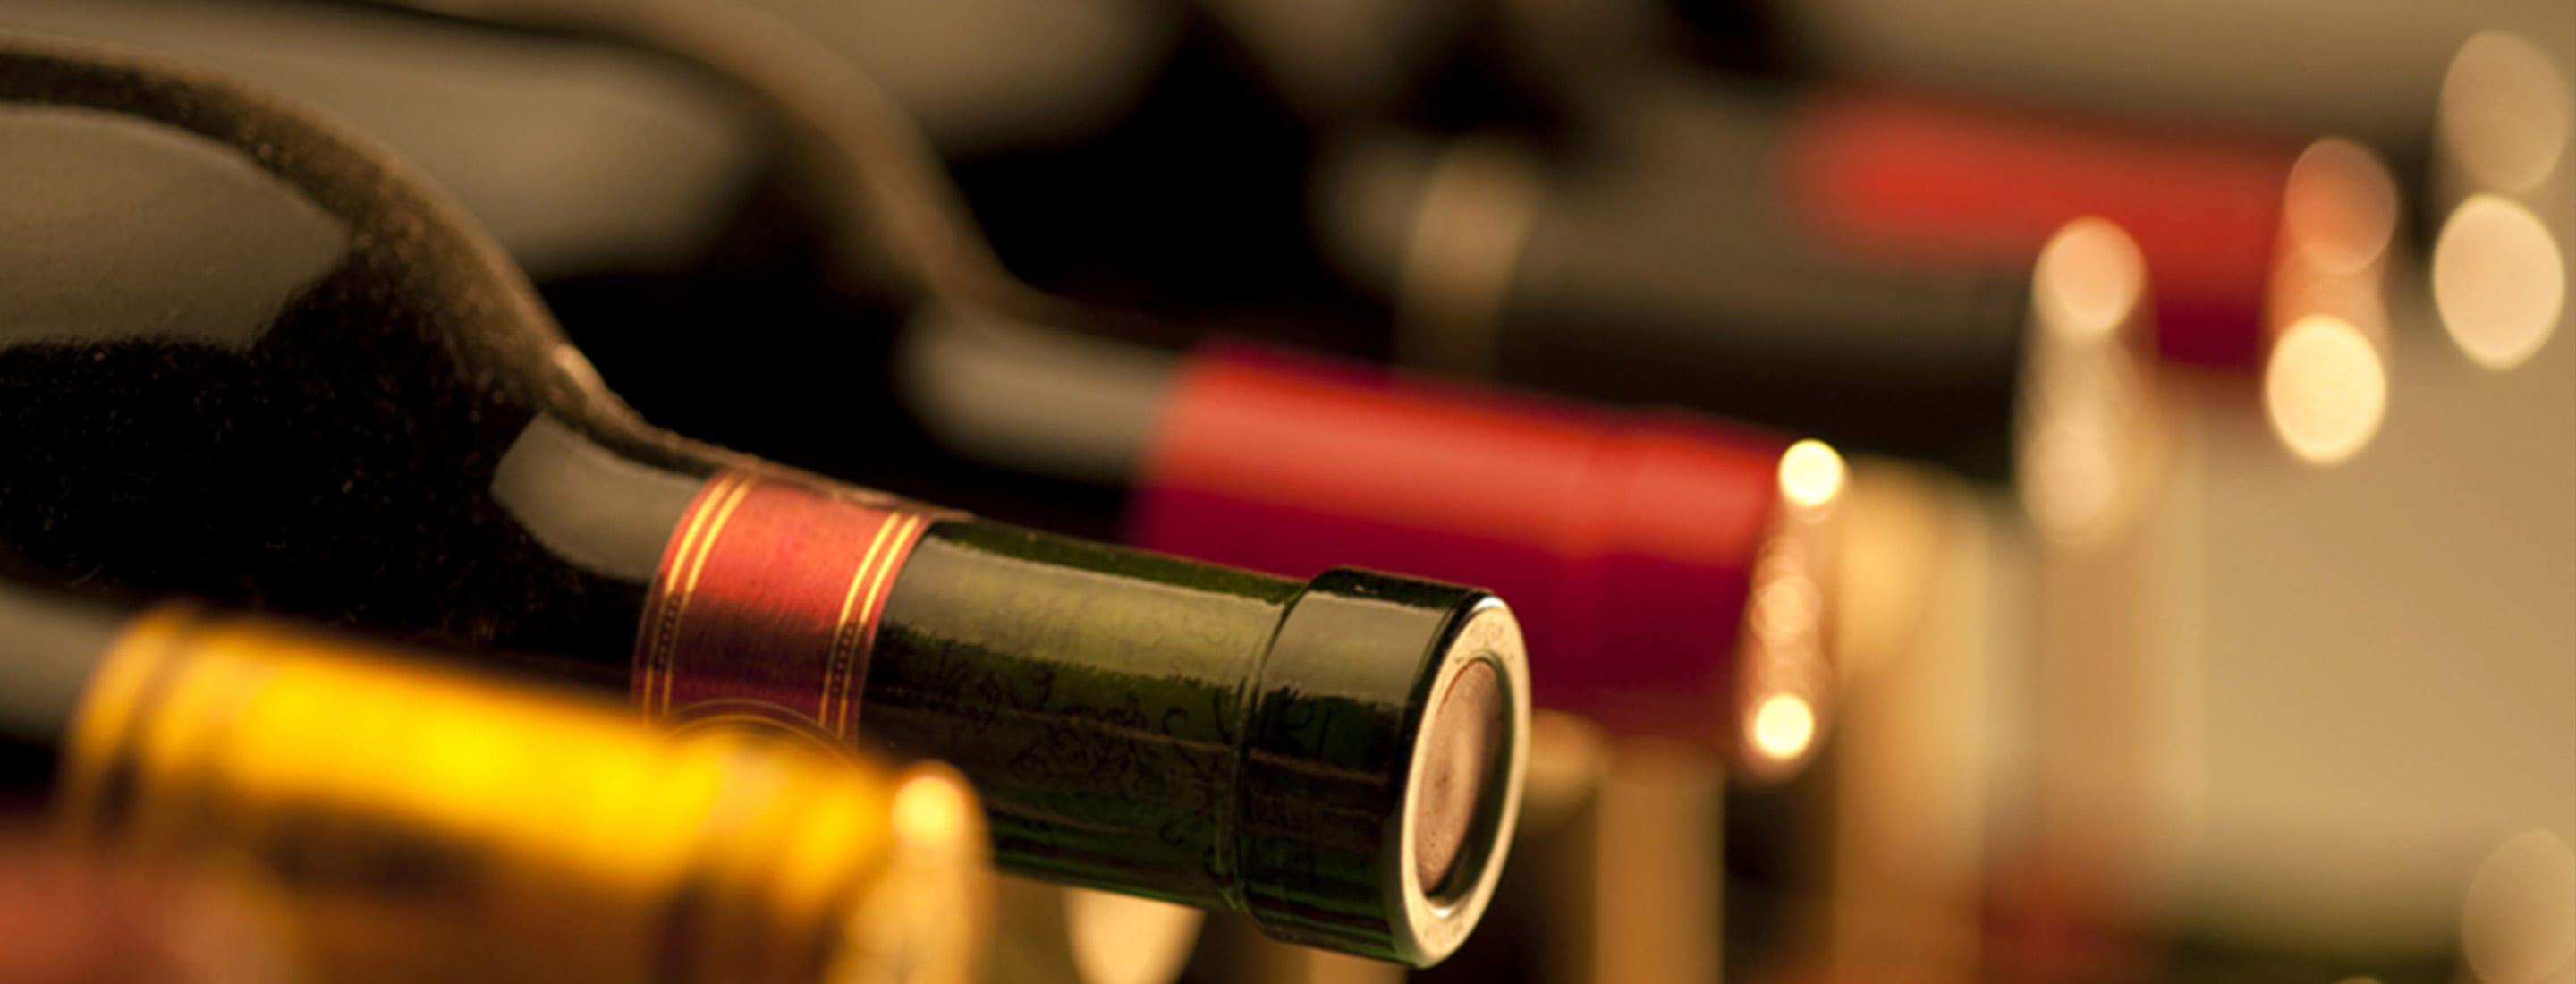 Picture of wine bottles on their side - focus on corks